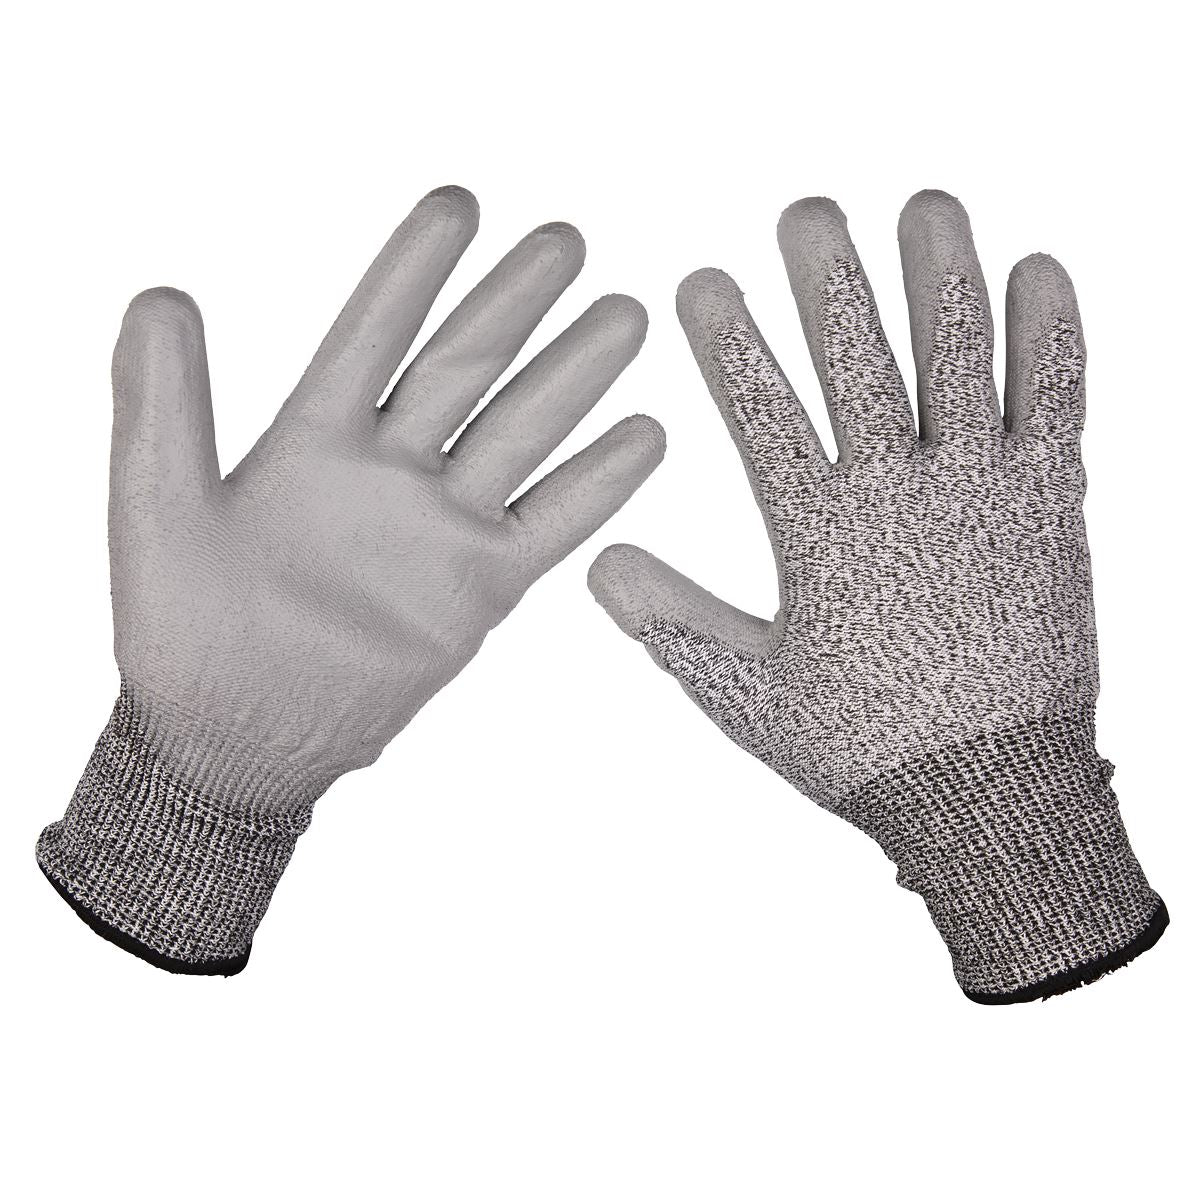 Worksafe by Sealey Anti-Cut PU Gloves (Cut Level C - Large) - Pair